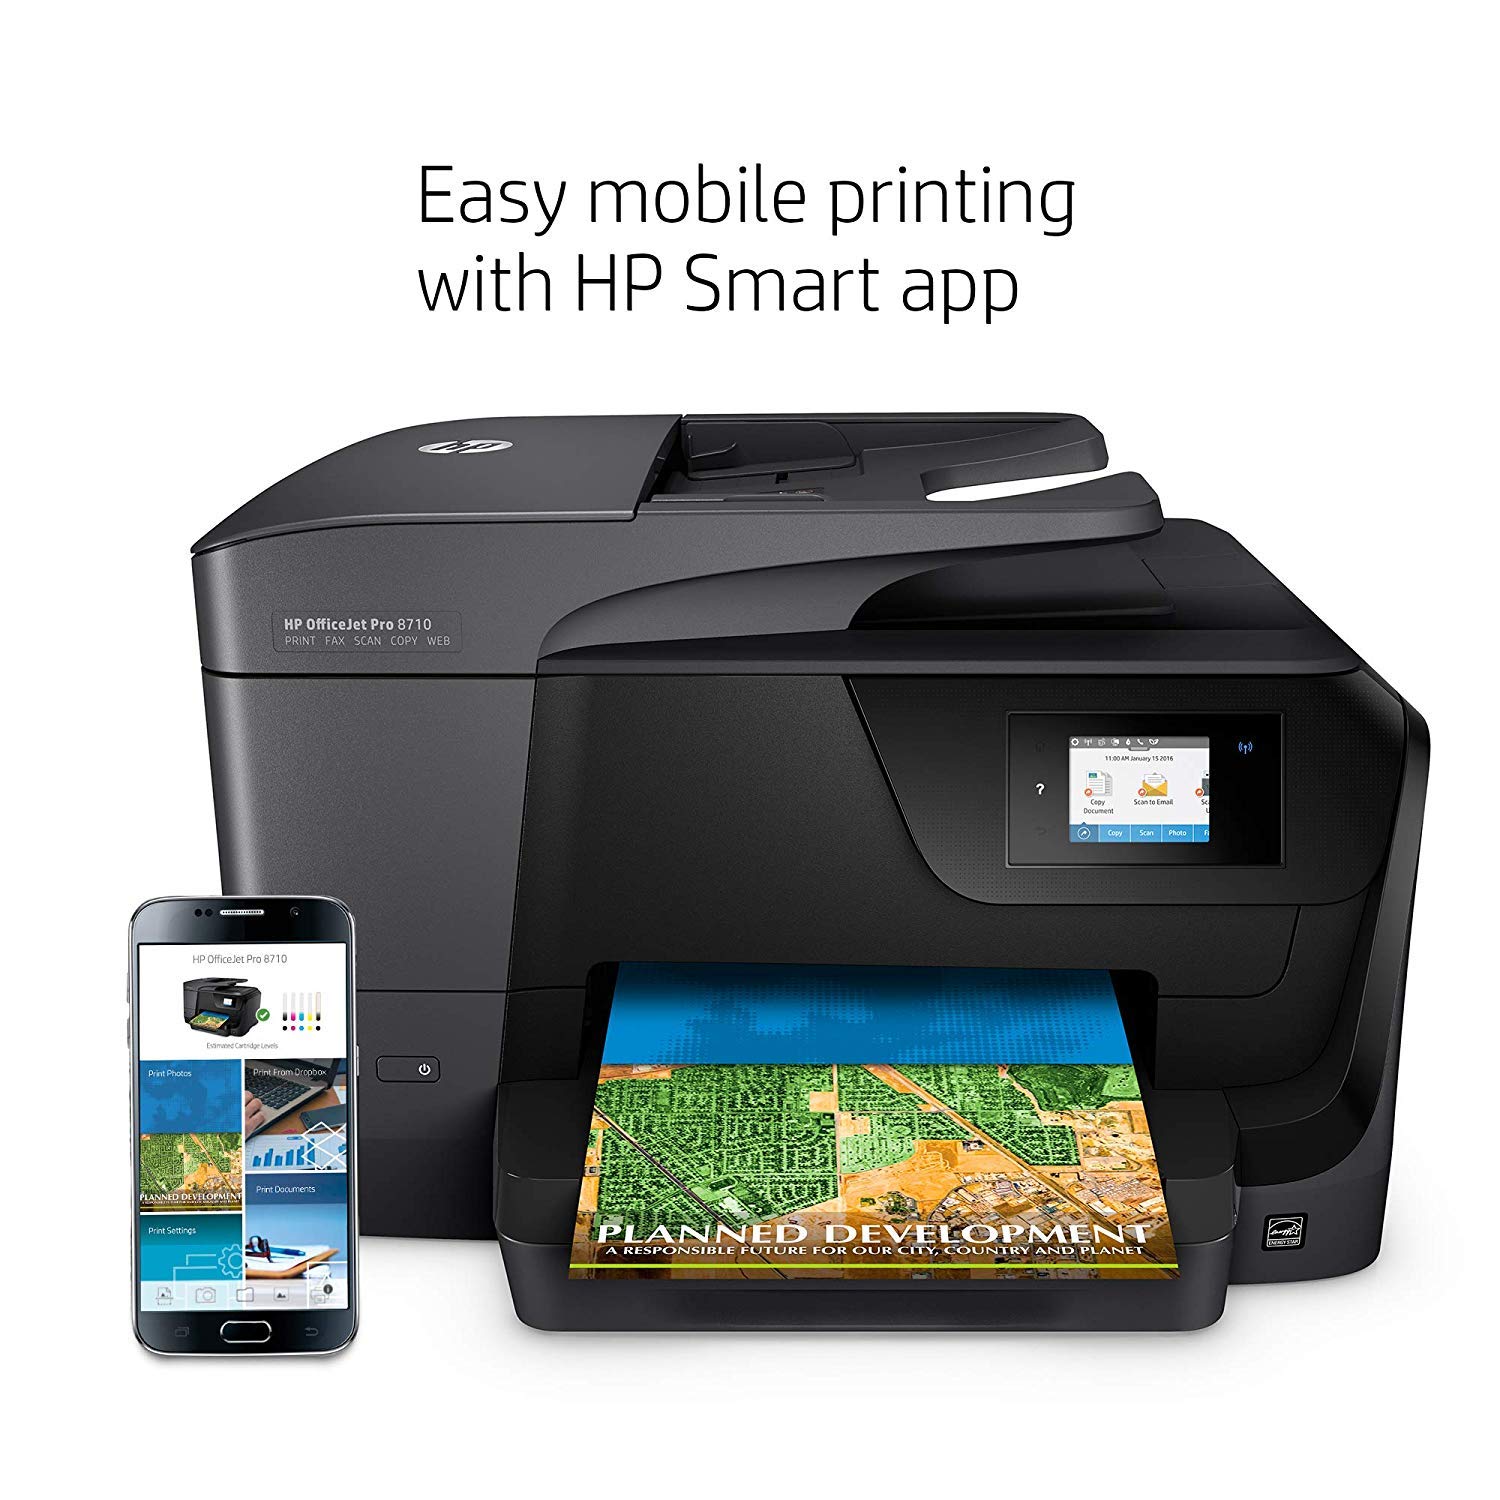 HP OfficeJet Pro 8710 All-in-One Wireless Color Printer, HP Instant Ink or Amazon Dash replenishment ready (M9L66A), Black